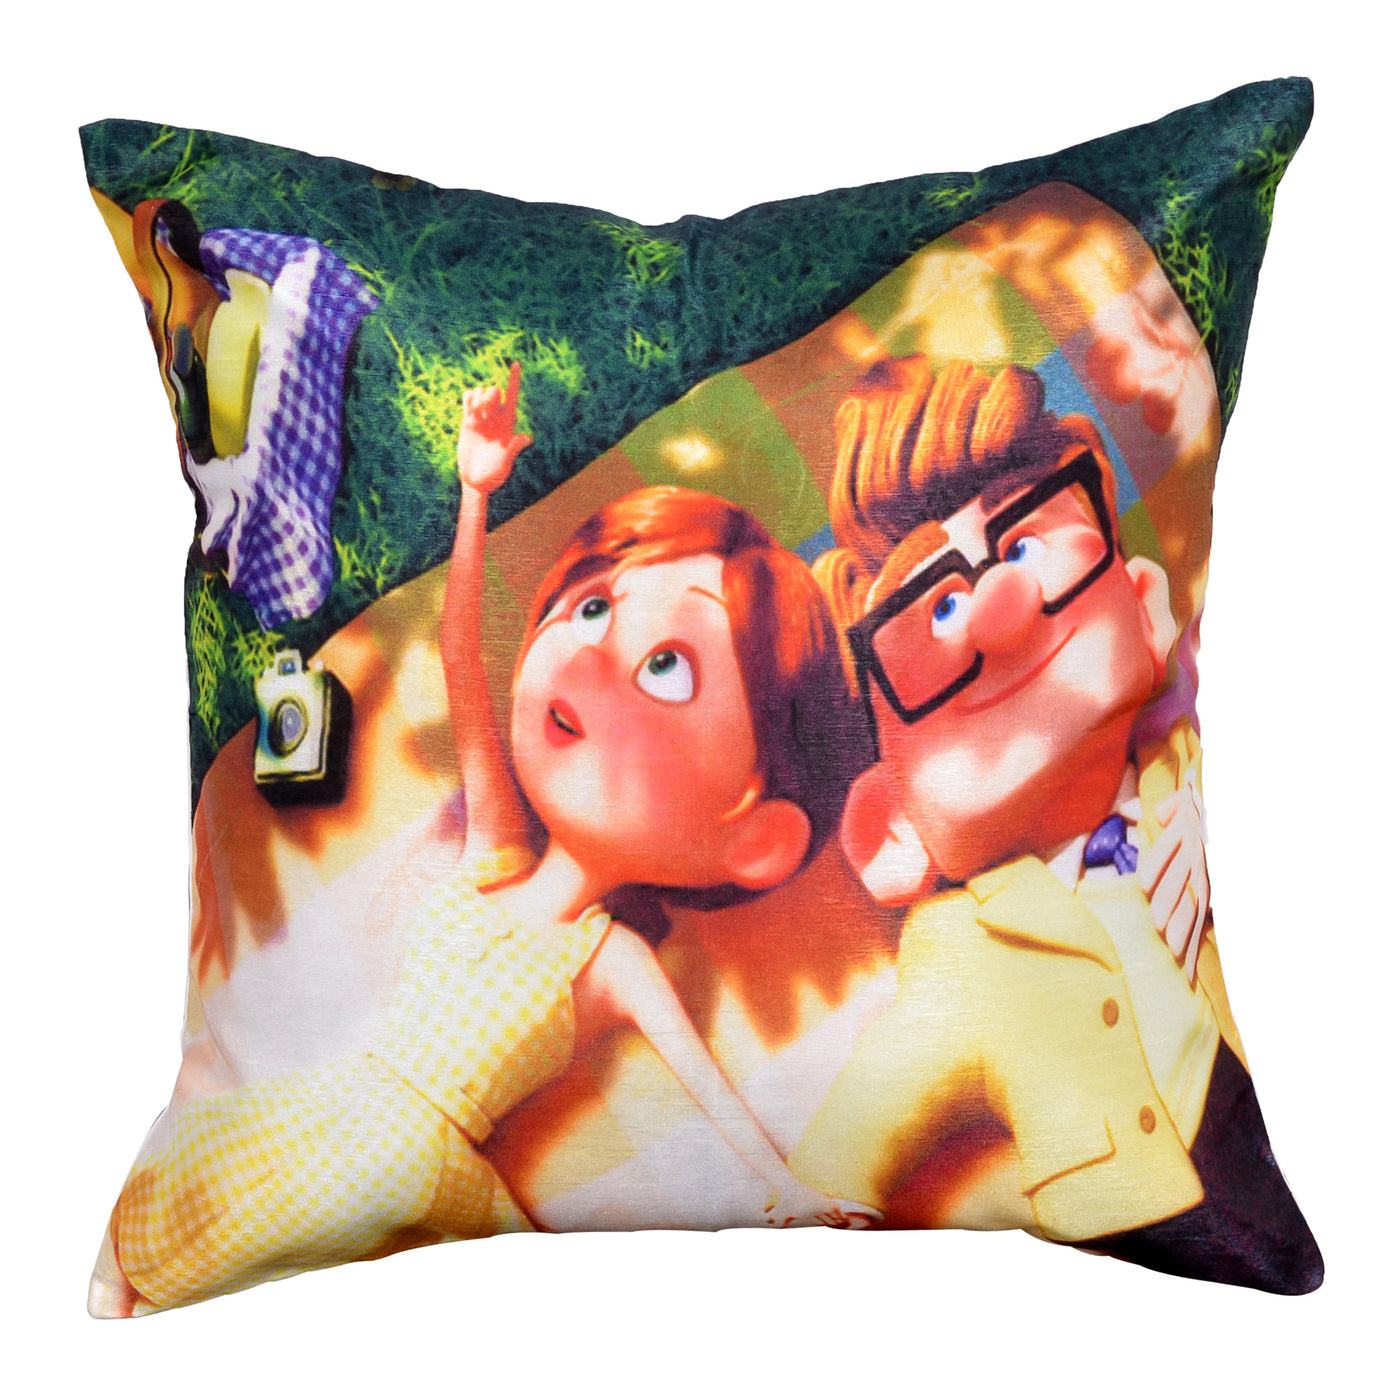 Up Movie Digital Print Polyester Cushion Cover 16x16